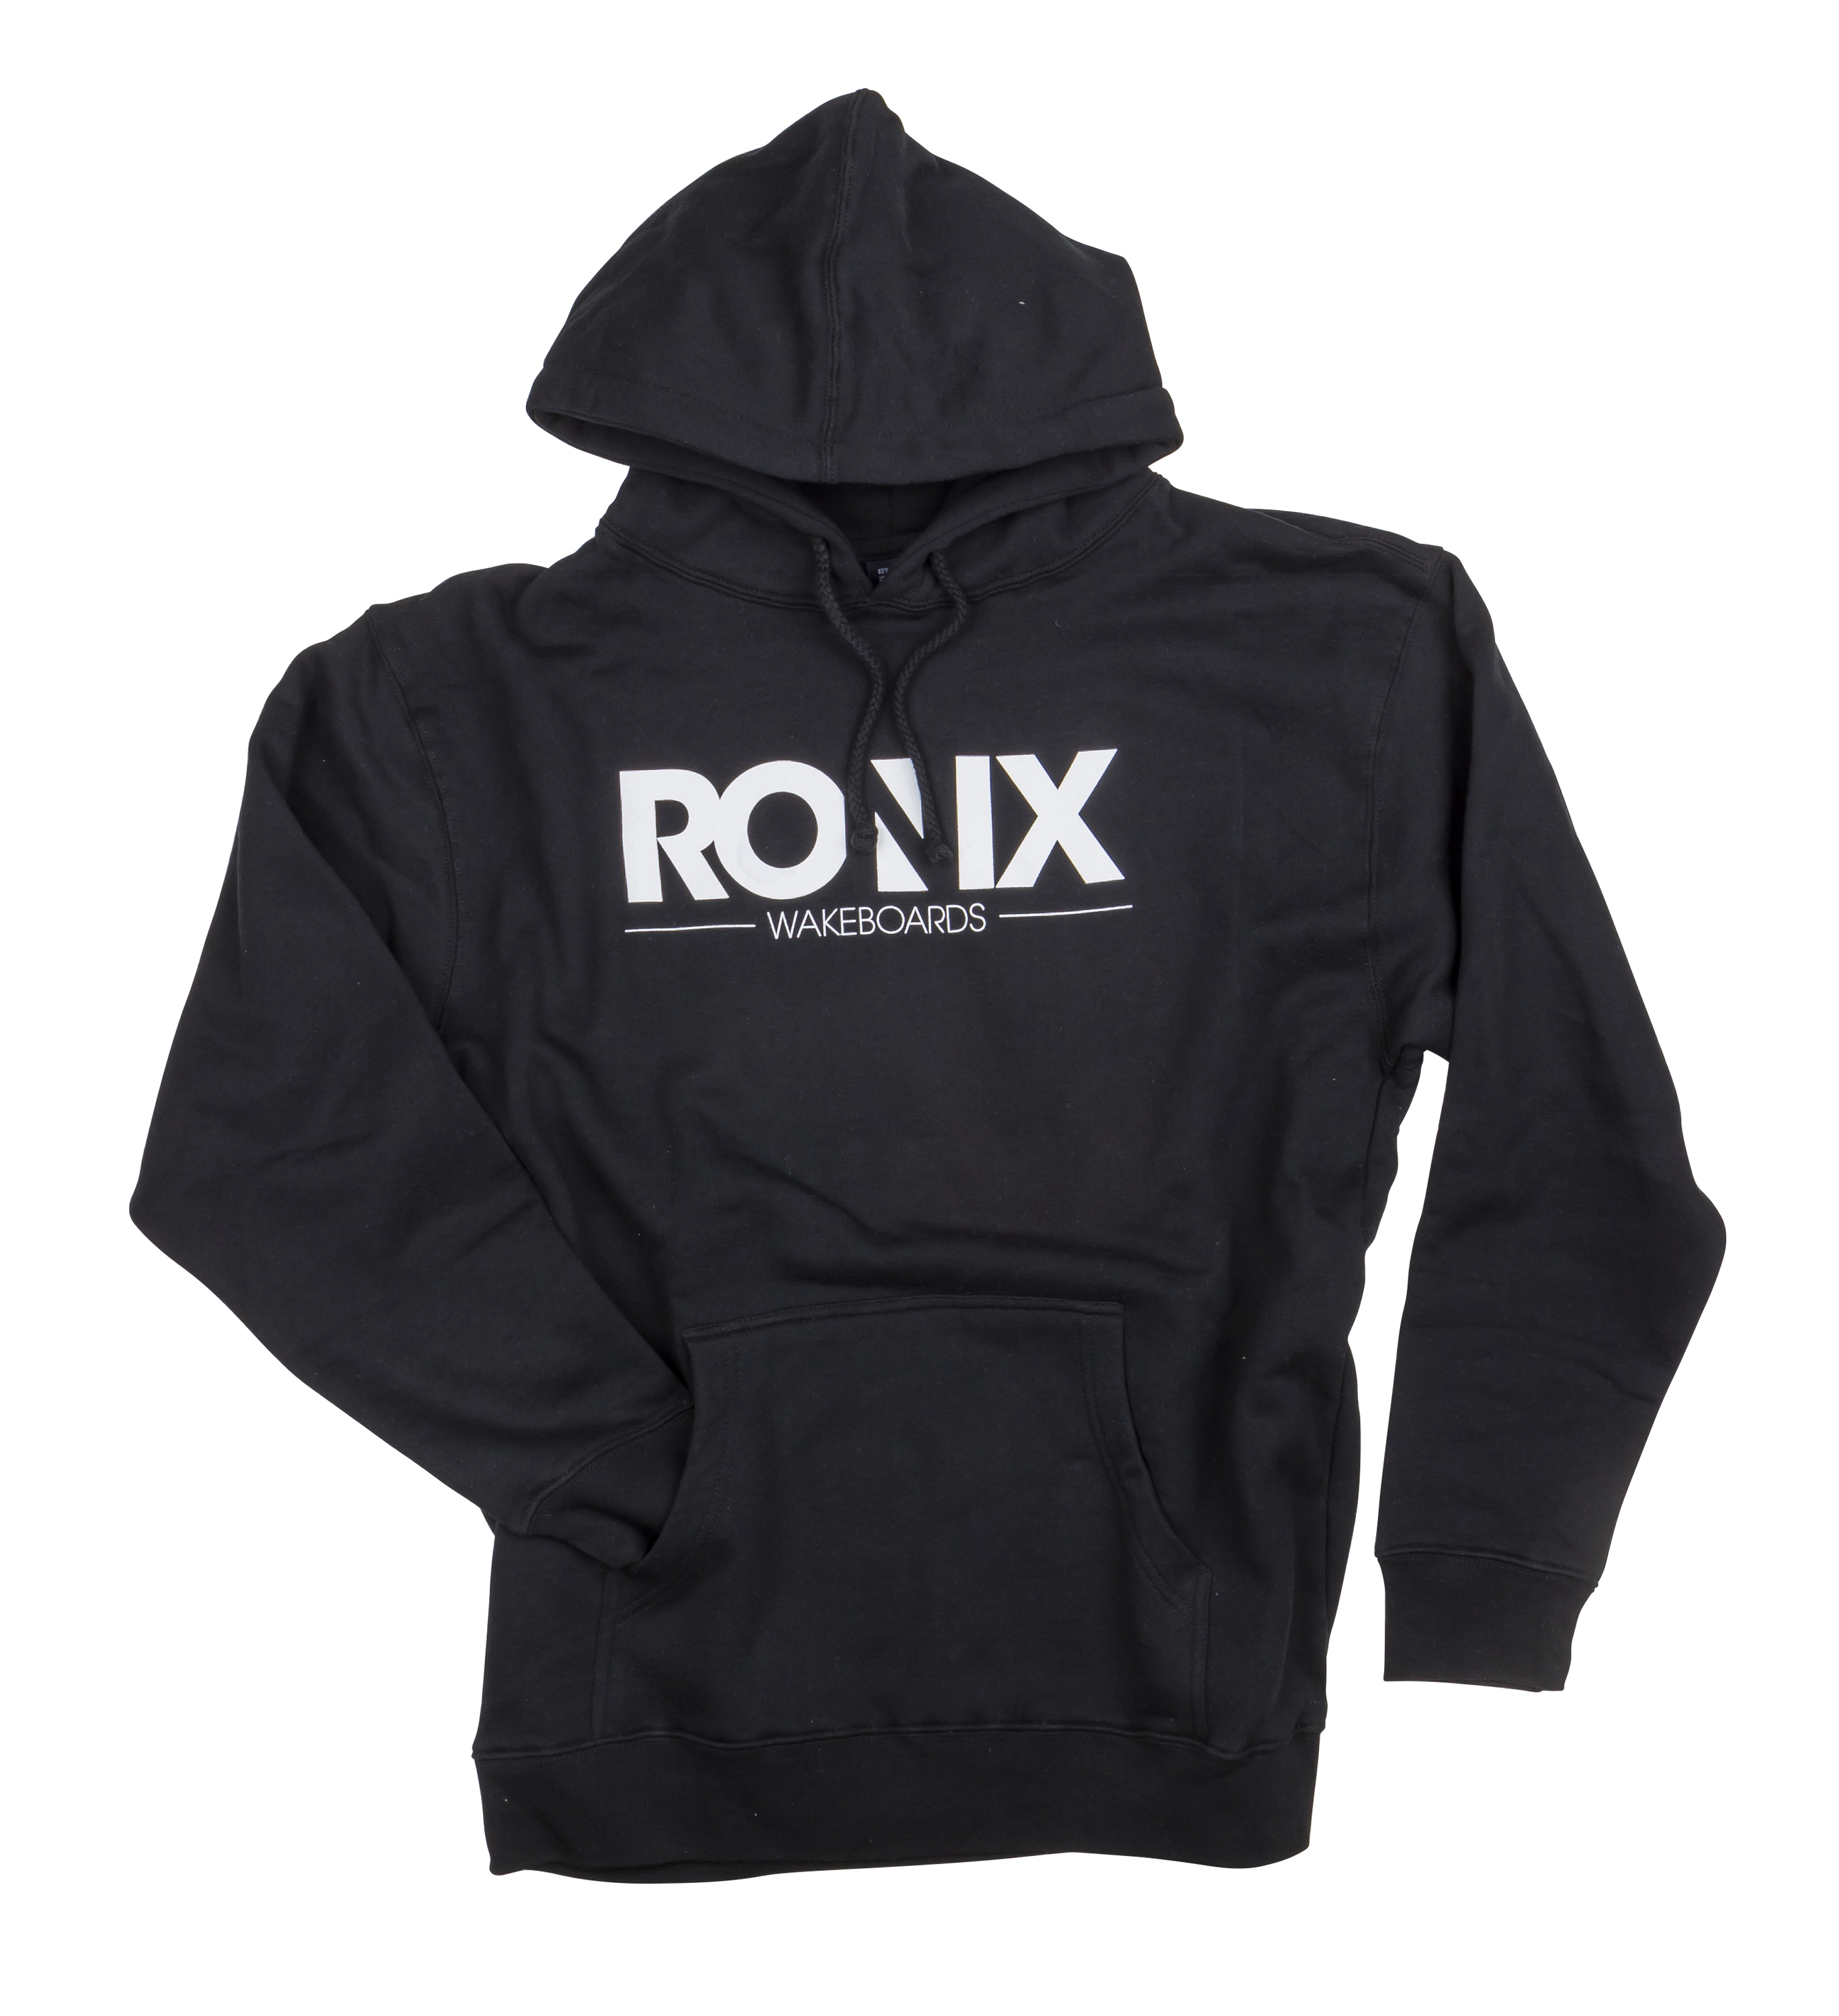   MEGACORP PULL OVER HOODIE RONIX 2017